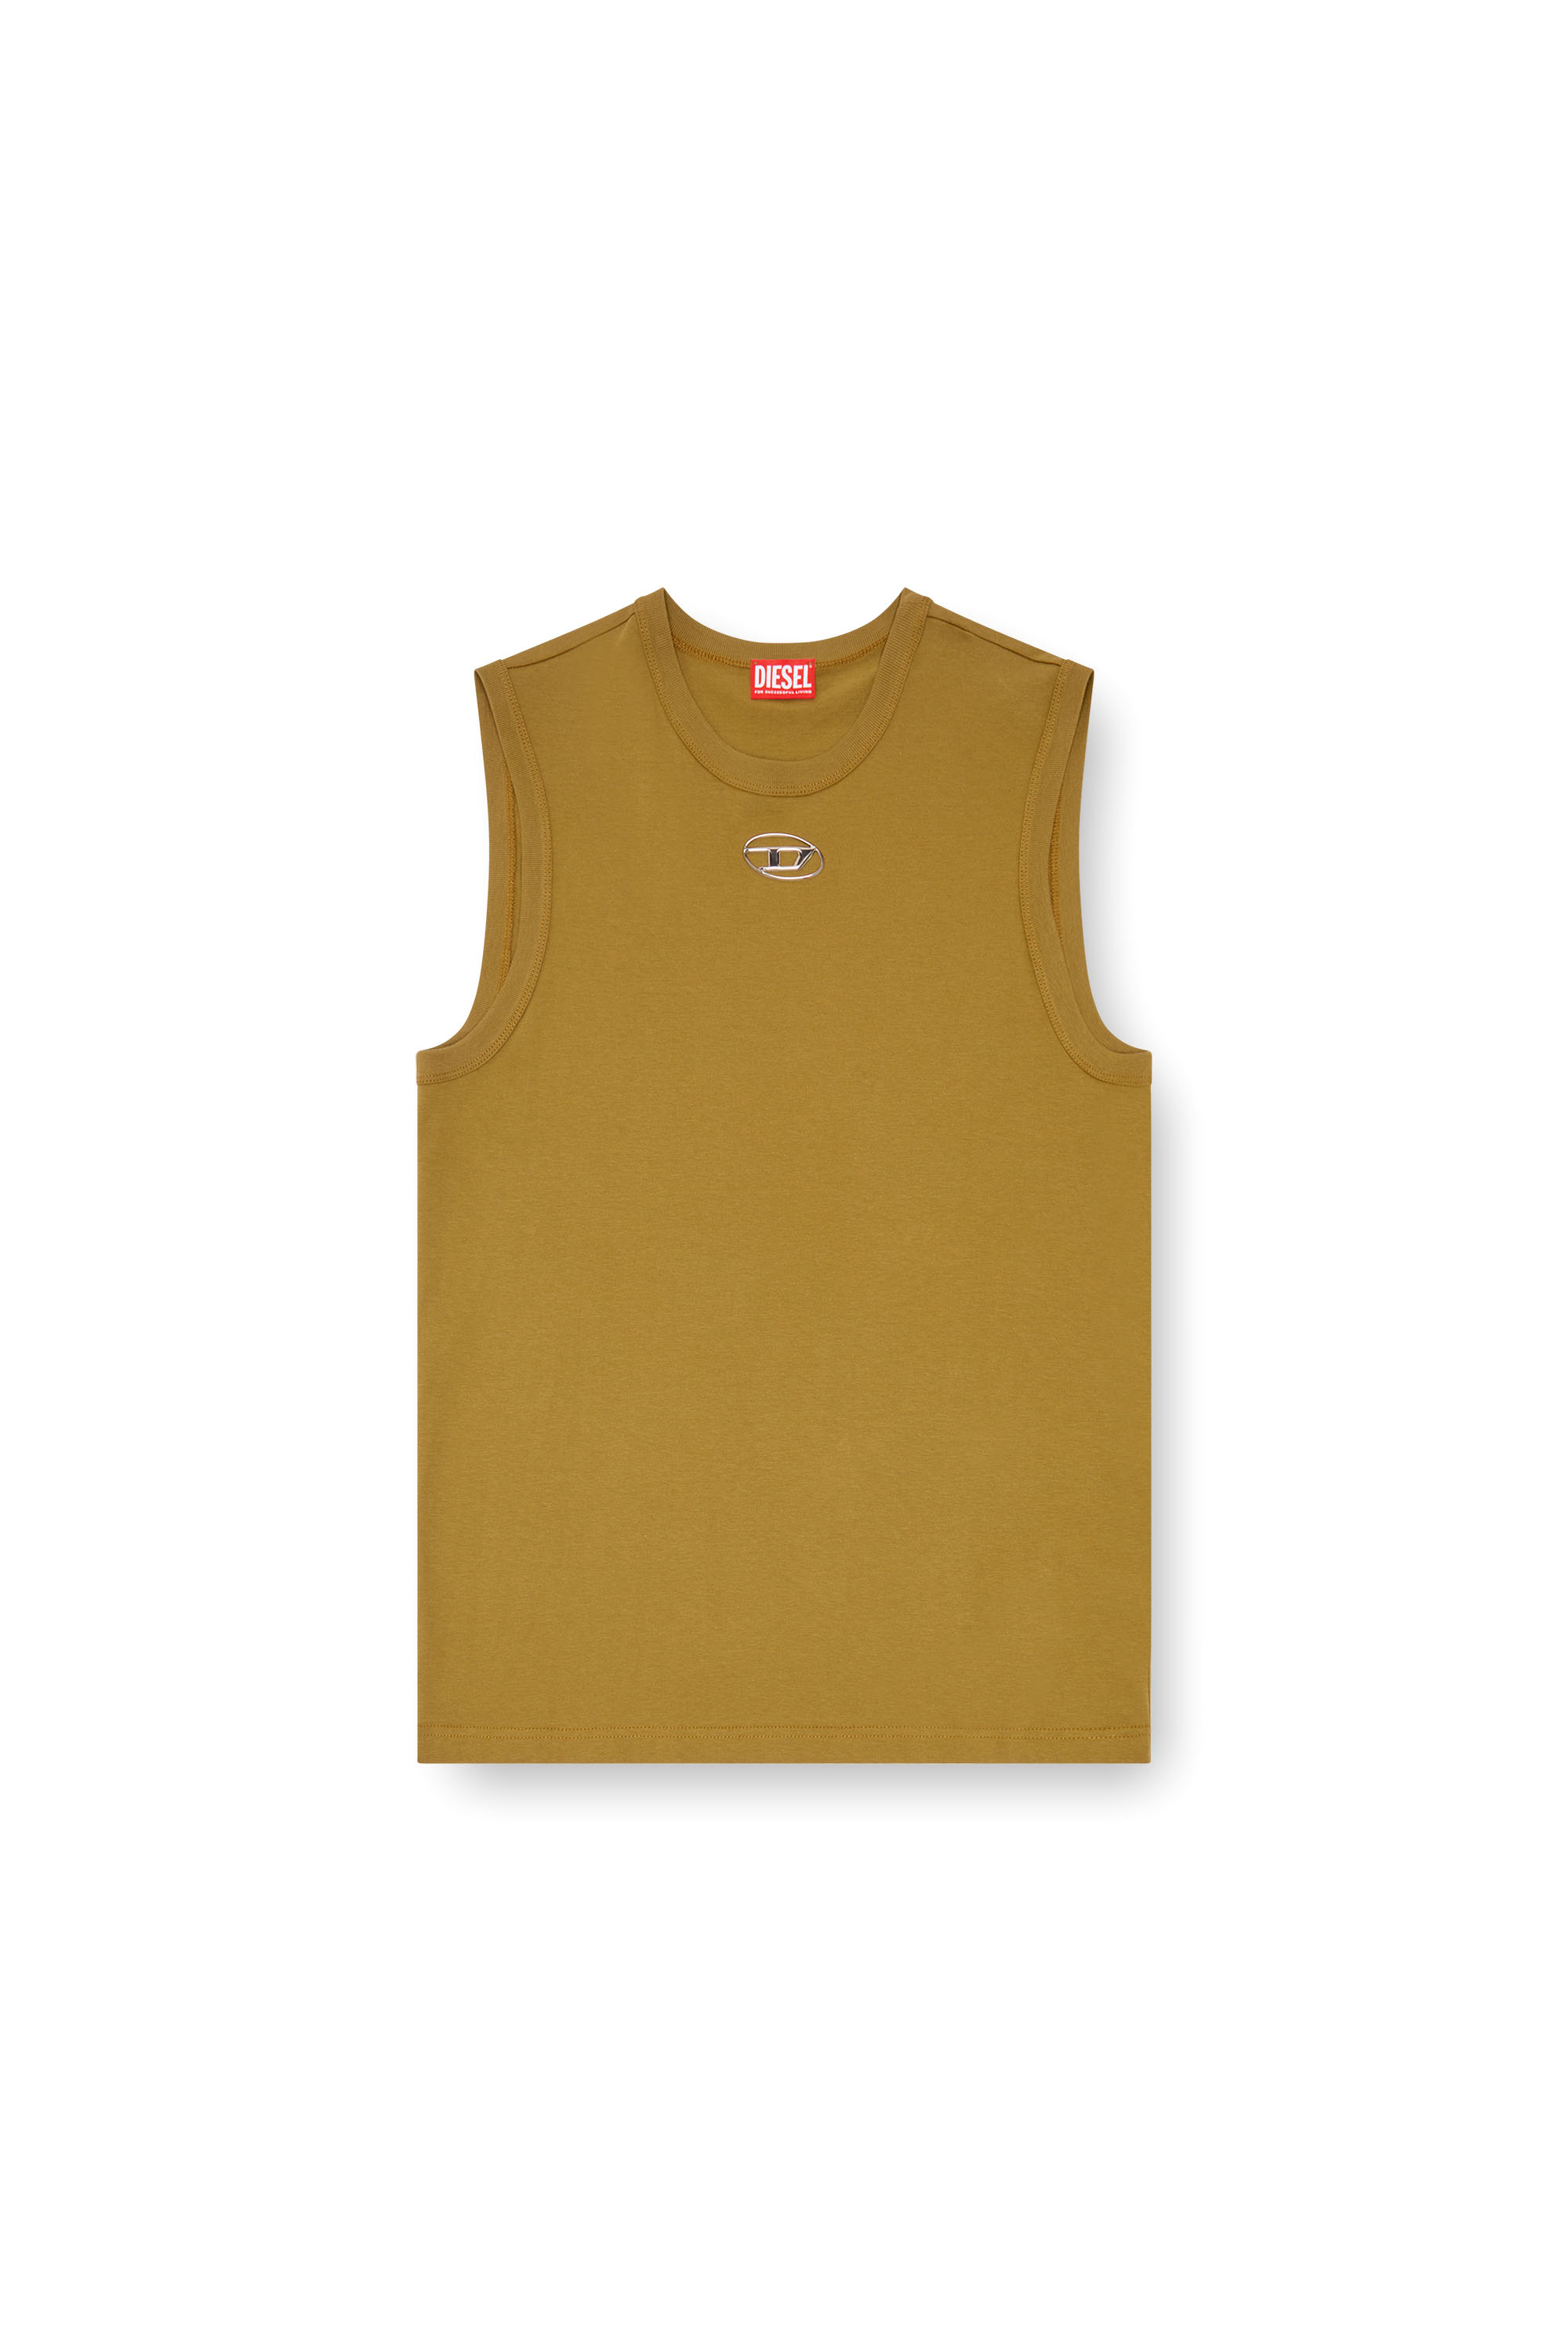 Diesel - T-BISCO-OD, Man Tank top with injection-moulded Oval D in ToBeDefined - Image 3